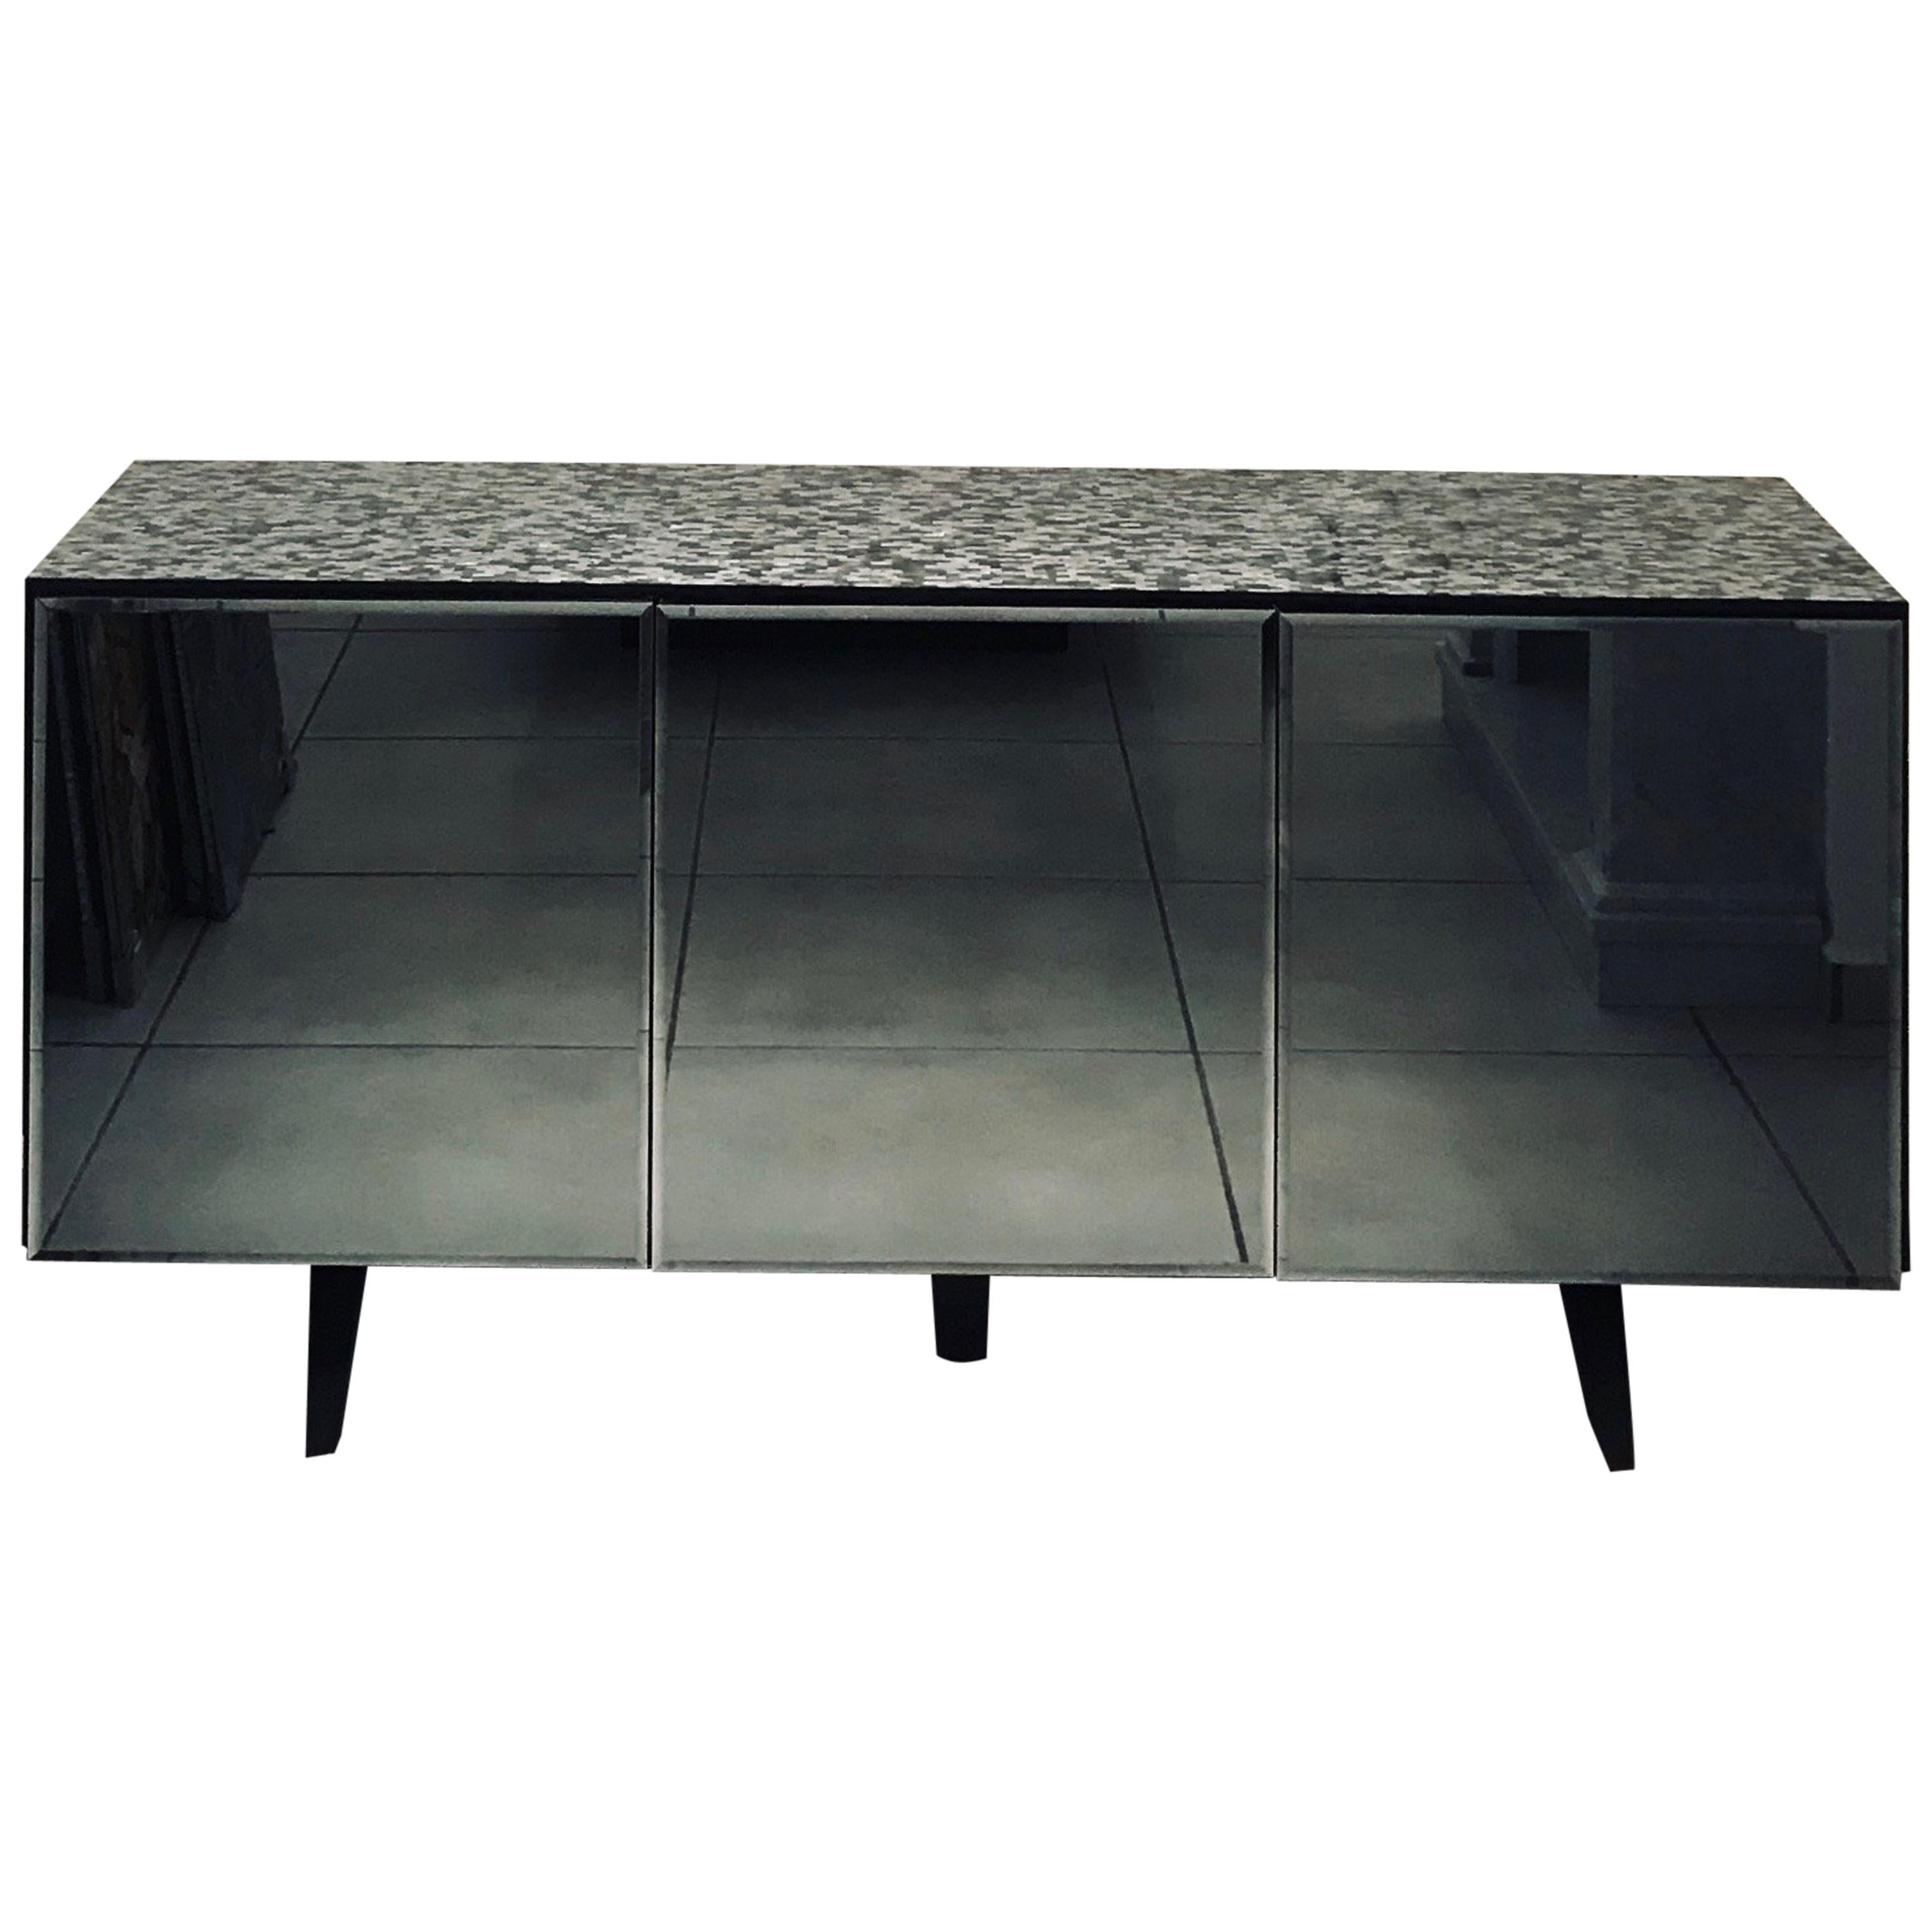 'Madrid' Mother of Pearl Sideboard Table with Grey Mirror Finish Doors im Angebot